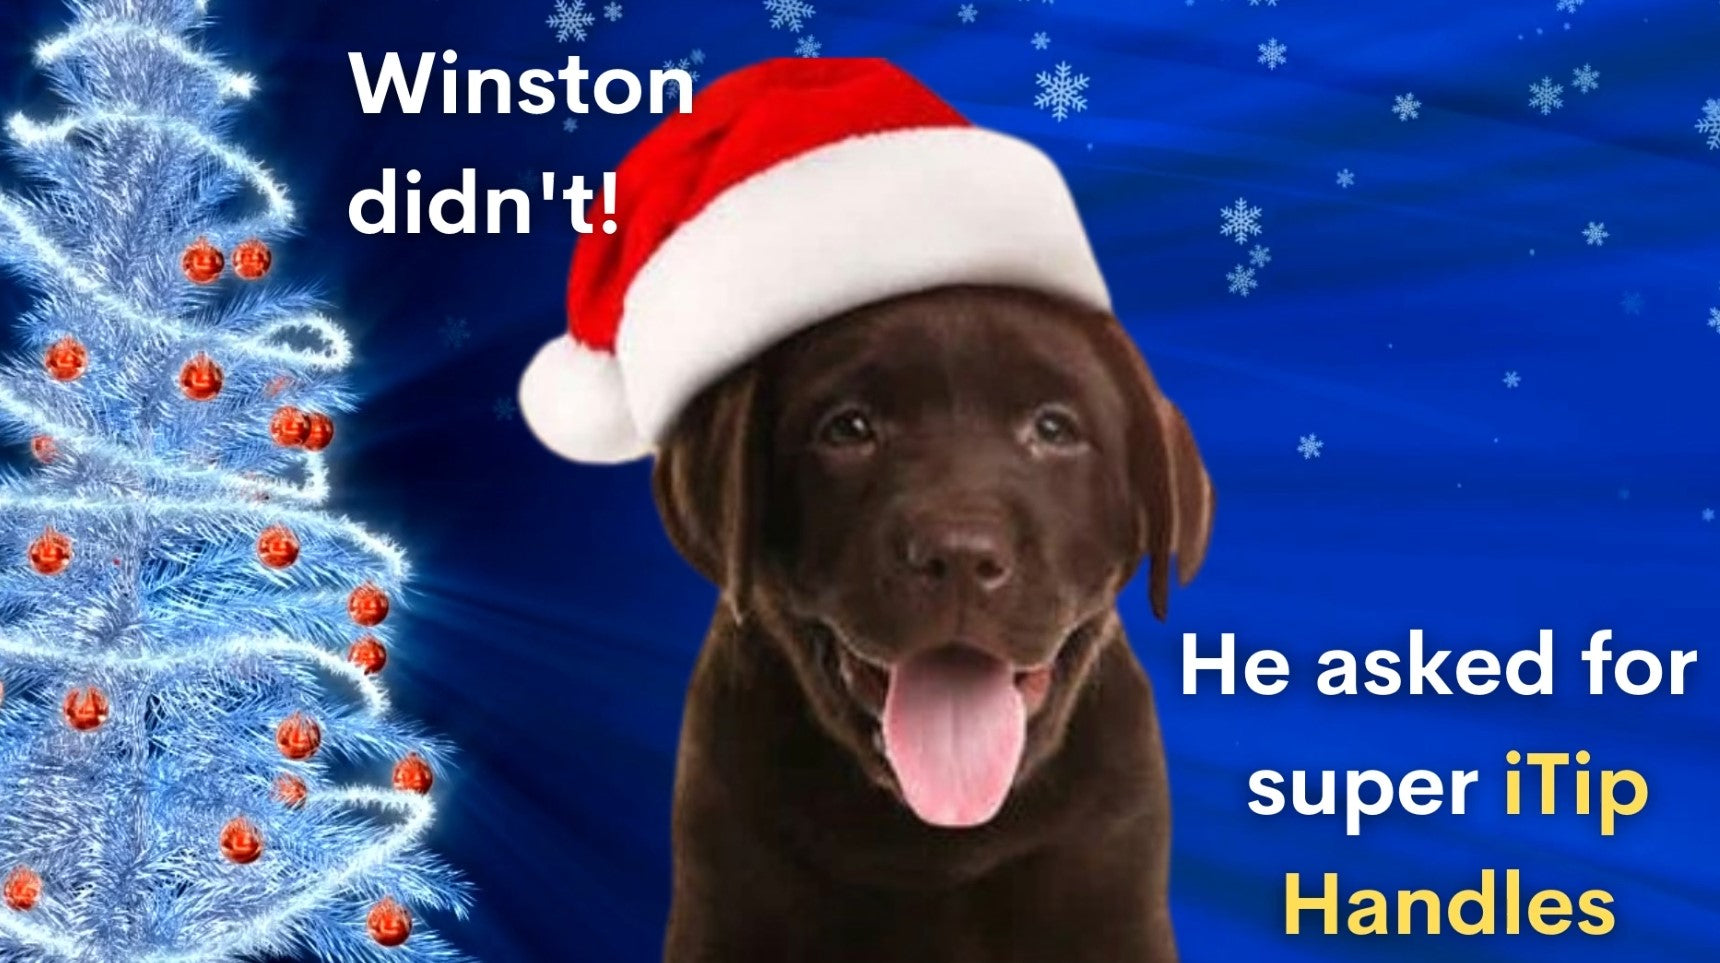 Check out Winston on our new Christmas media!